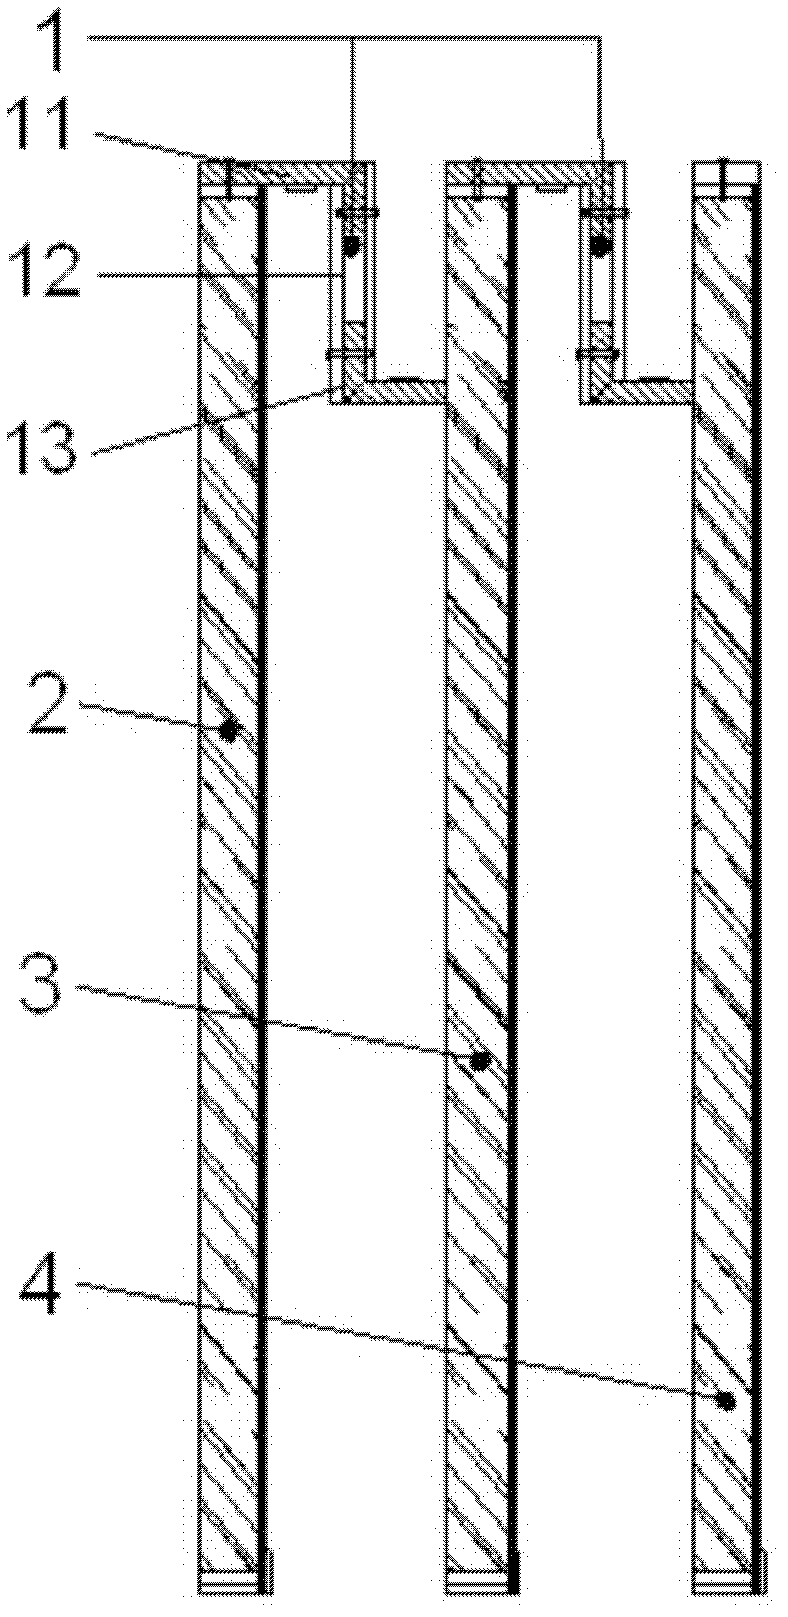 Sound absorption unit capable of being installed quickly